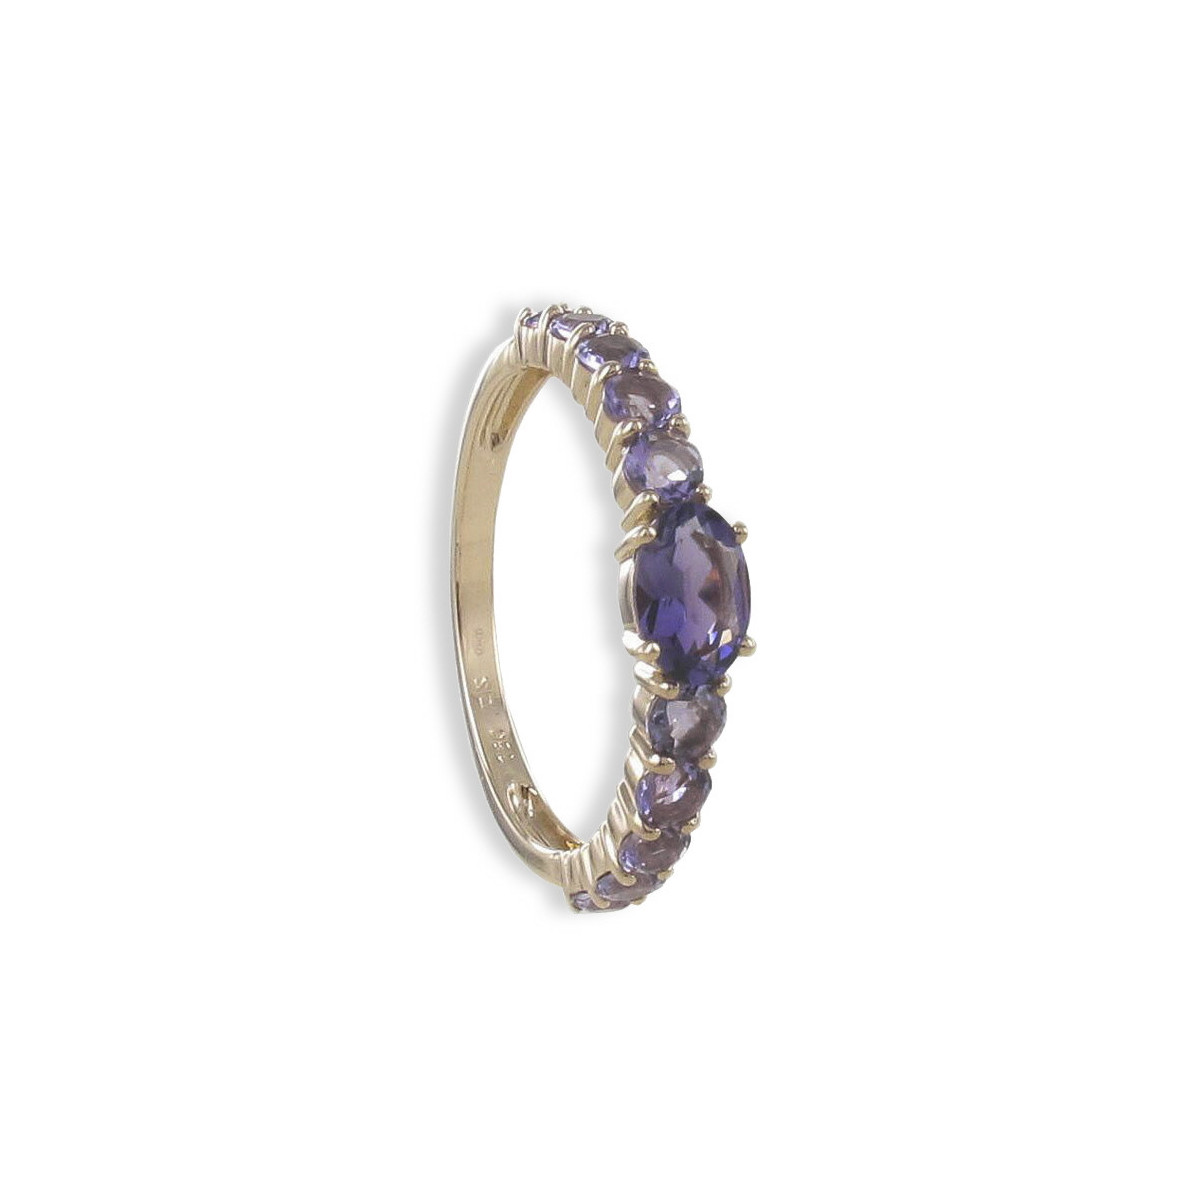 ROSE GOLD RING WITH 11 AMETHYST